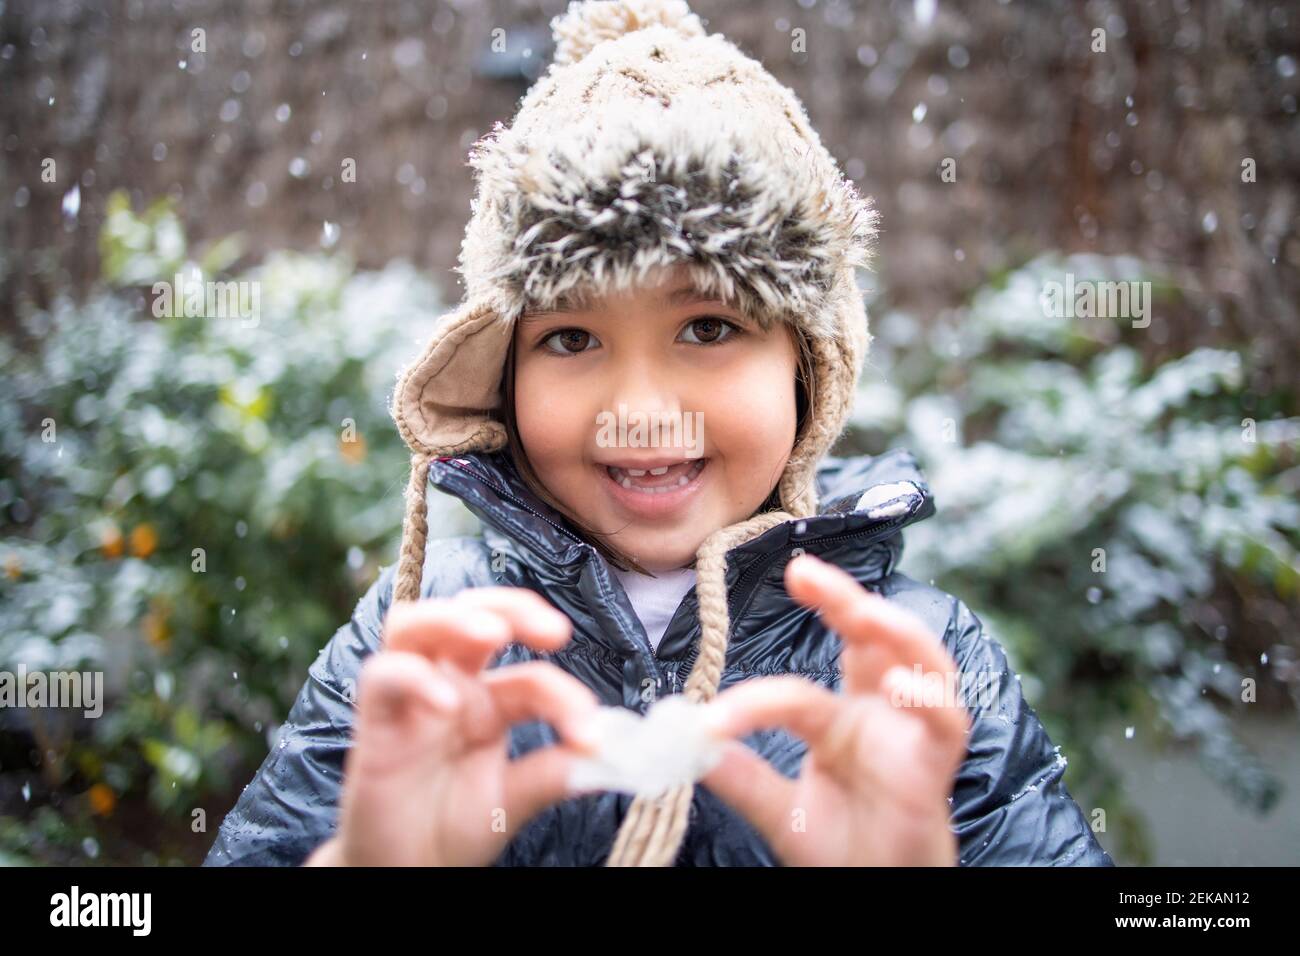 Cute girl in knit hat during snow Stock Photo